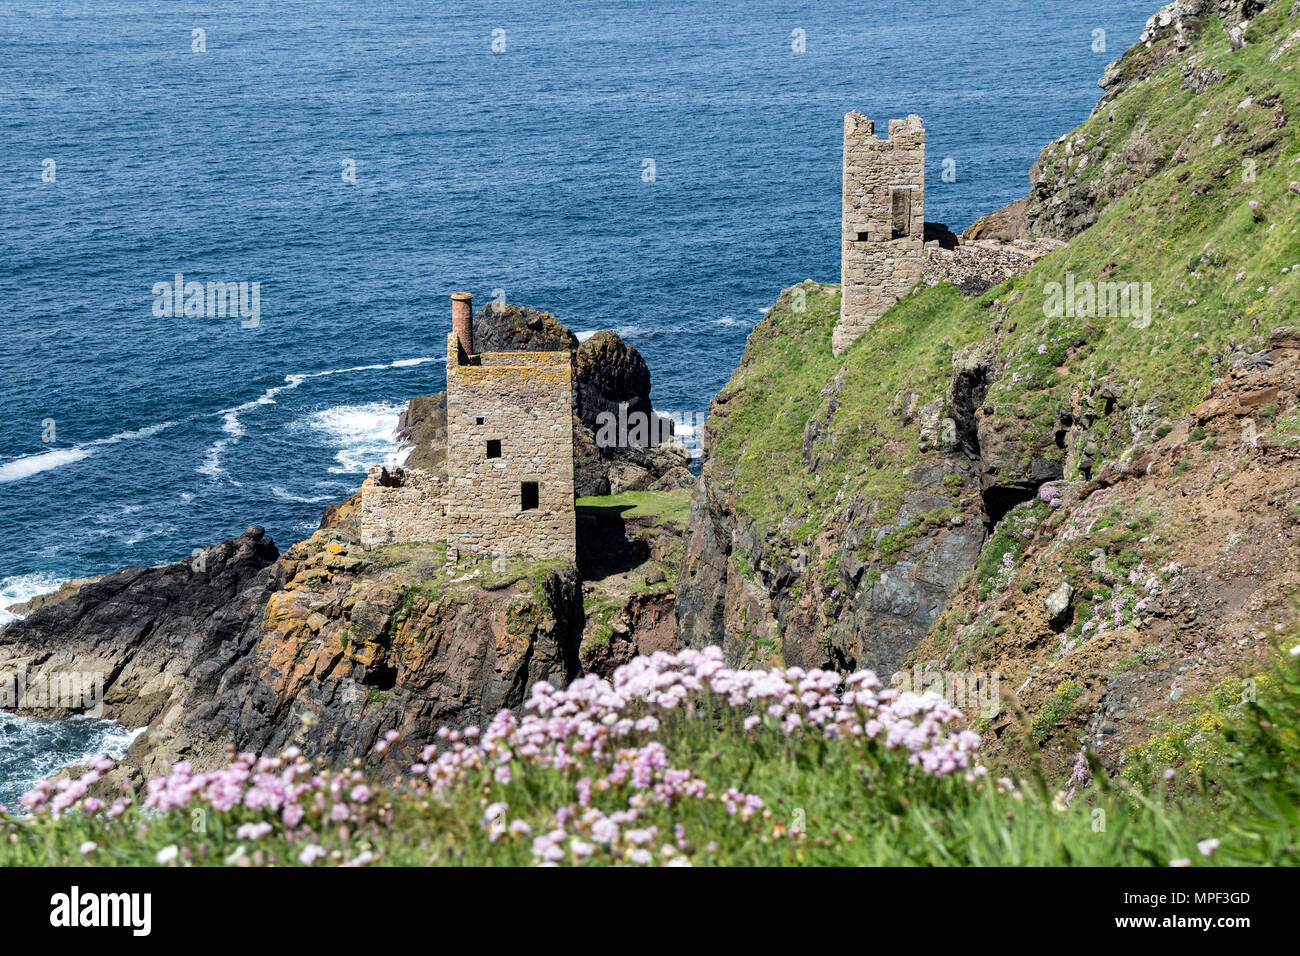 The Ruined Crowns Engine Houses of the Botallack Mines Viewed From the South West Coast Path, Botallack, Near St Just, Cornwall, UK. Stock Photo